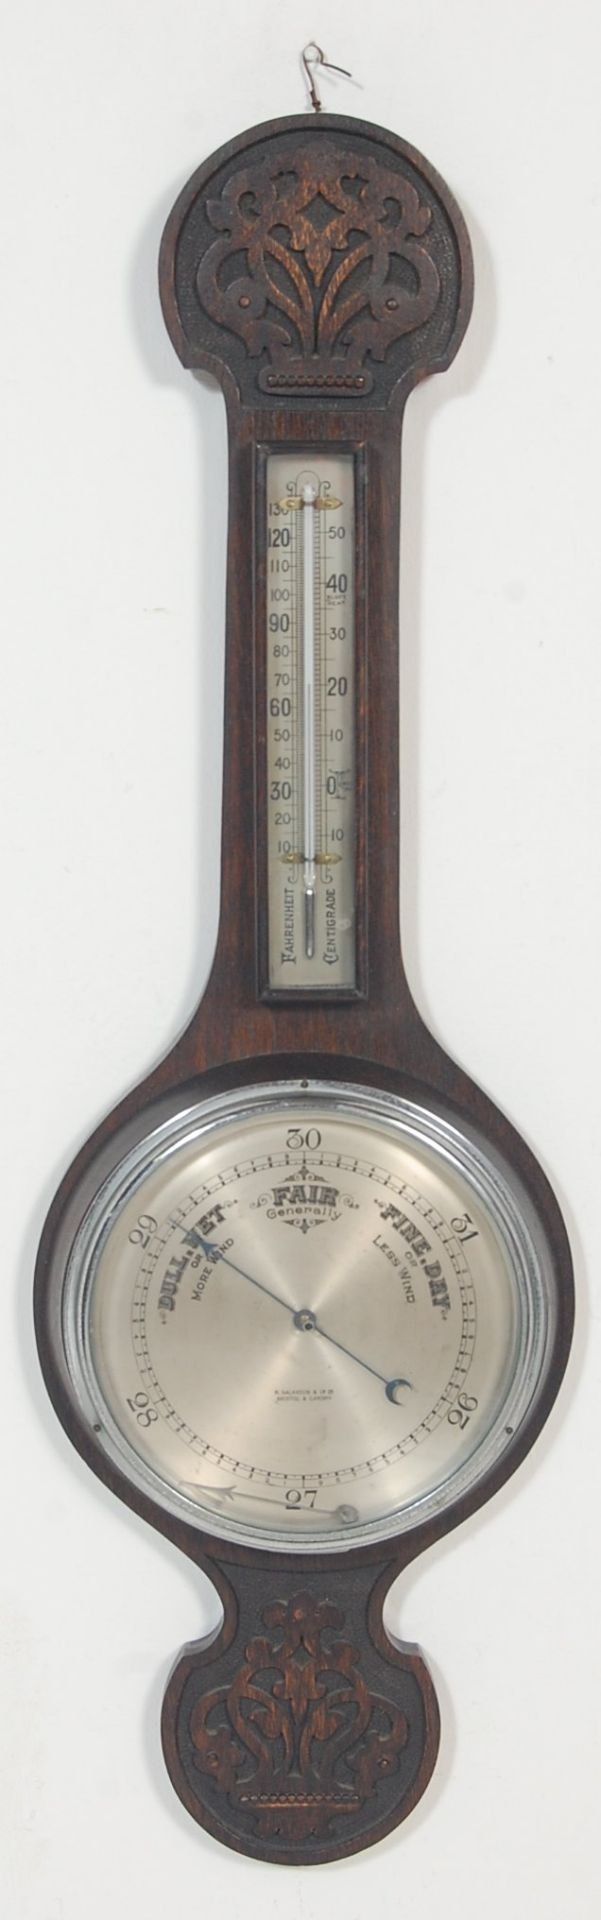 An early 20th century carved oak aneroid wall barometer. The barometer of banjo form having